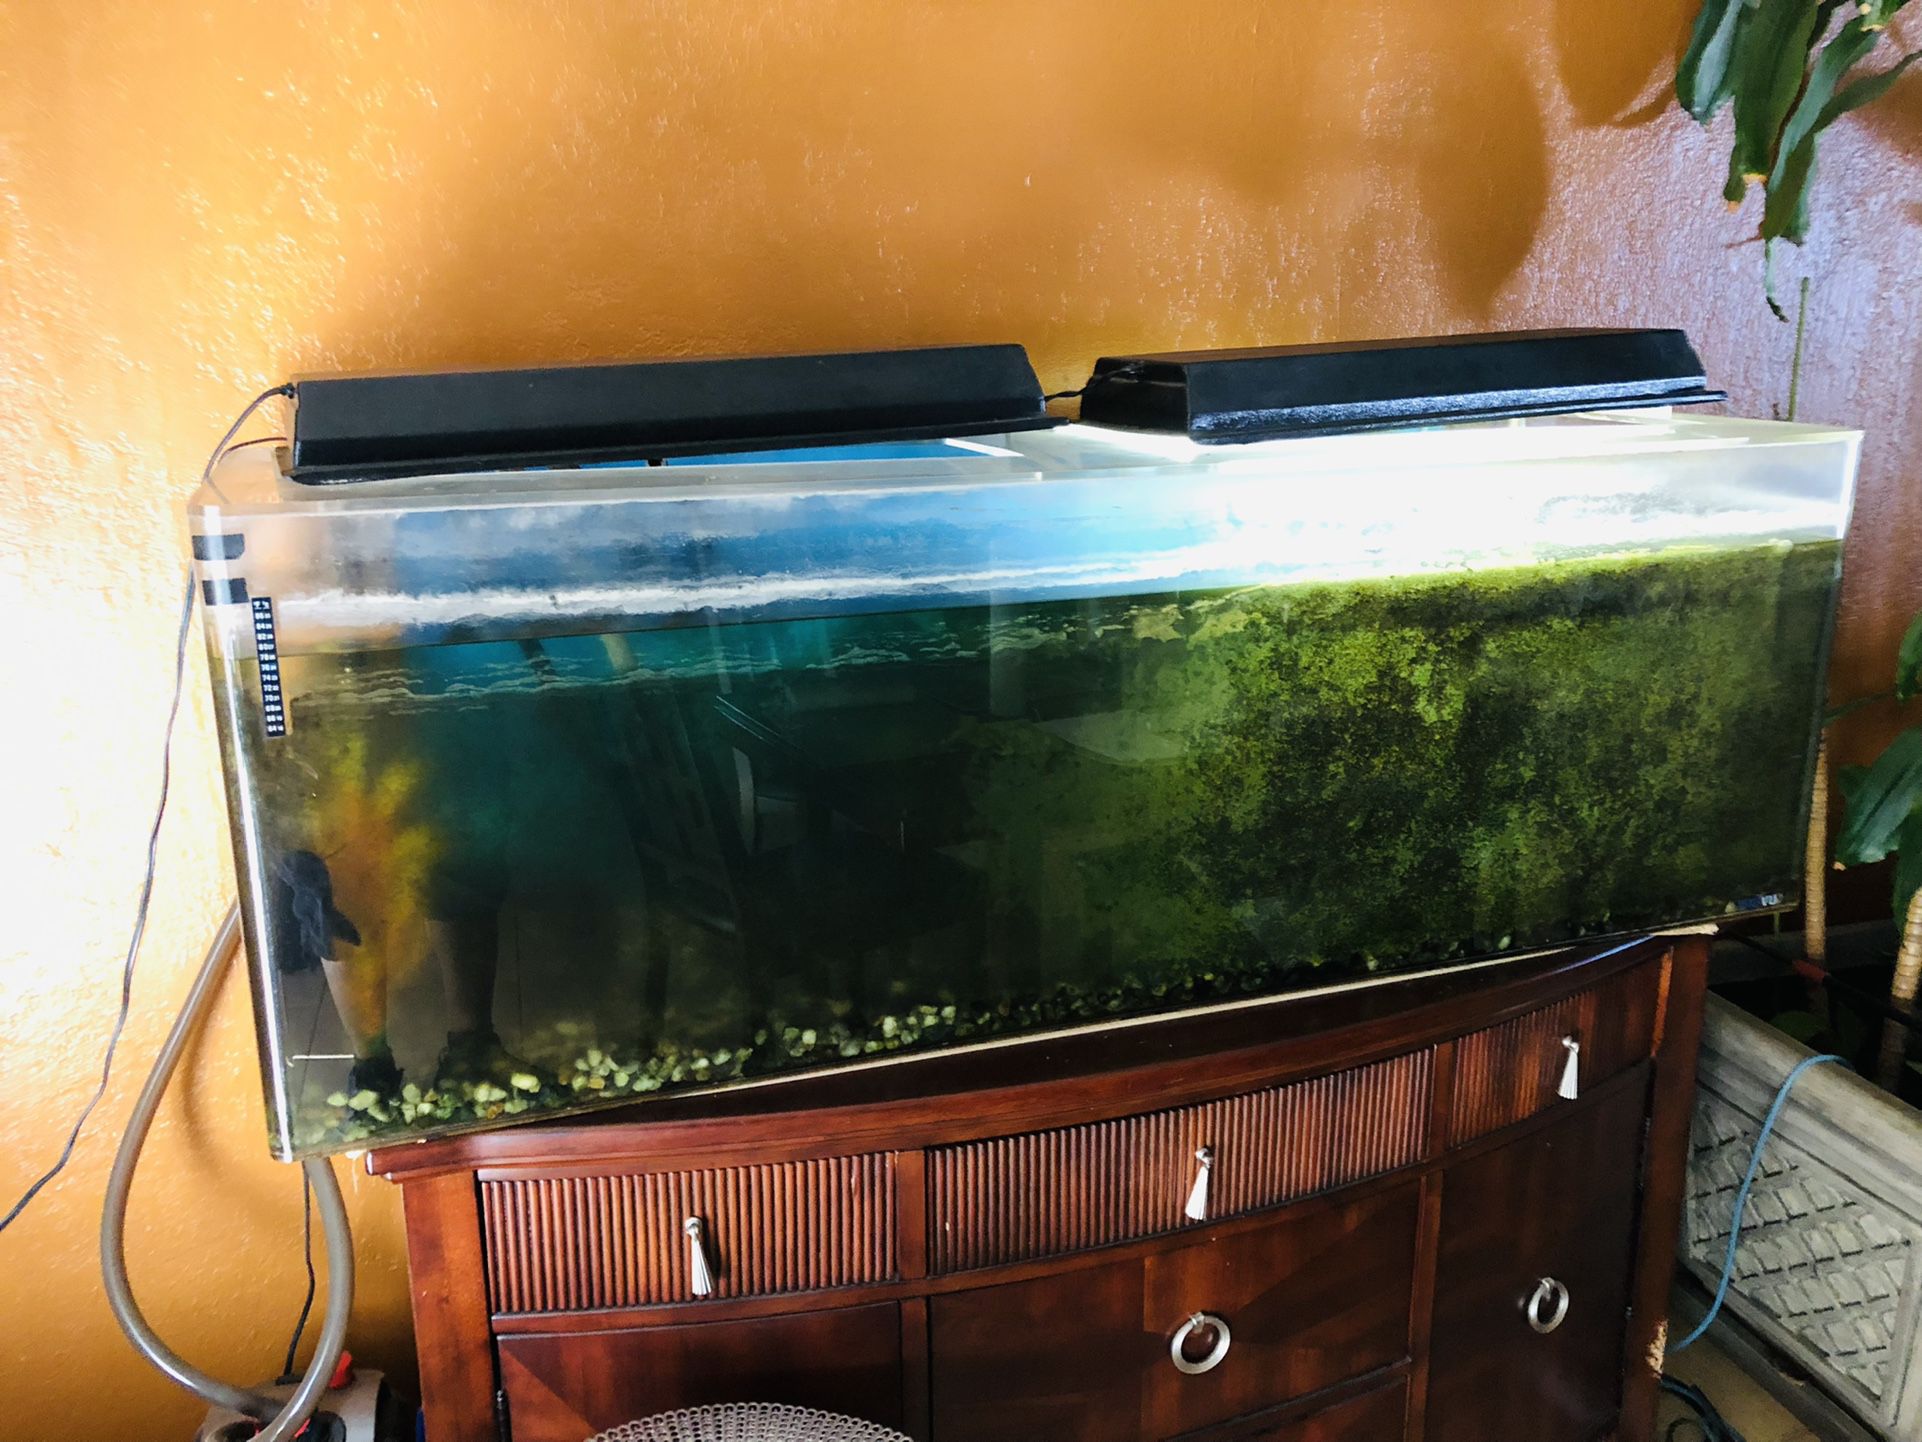 Large aquarium  with Pumps, Filters. The Aquarium is 100 Gallons and  is 5 feet long. 